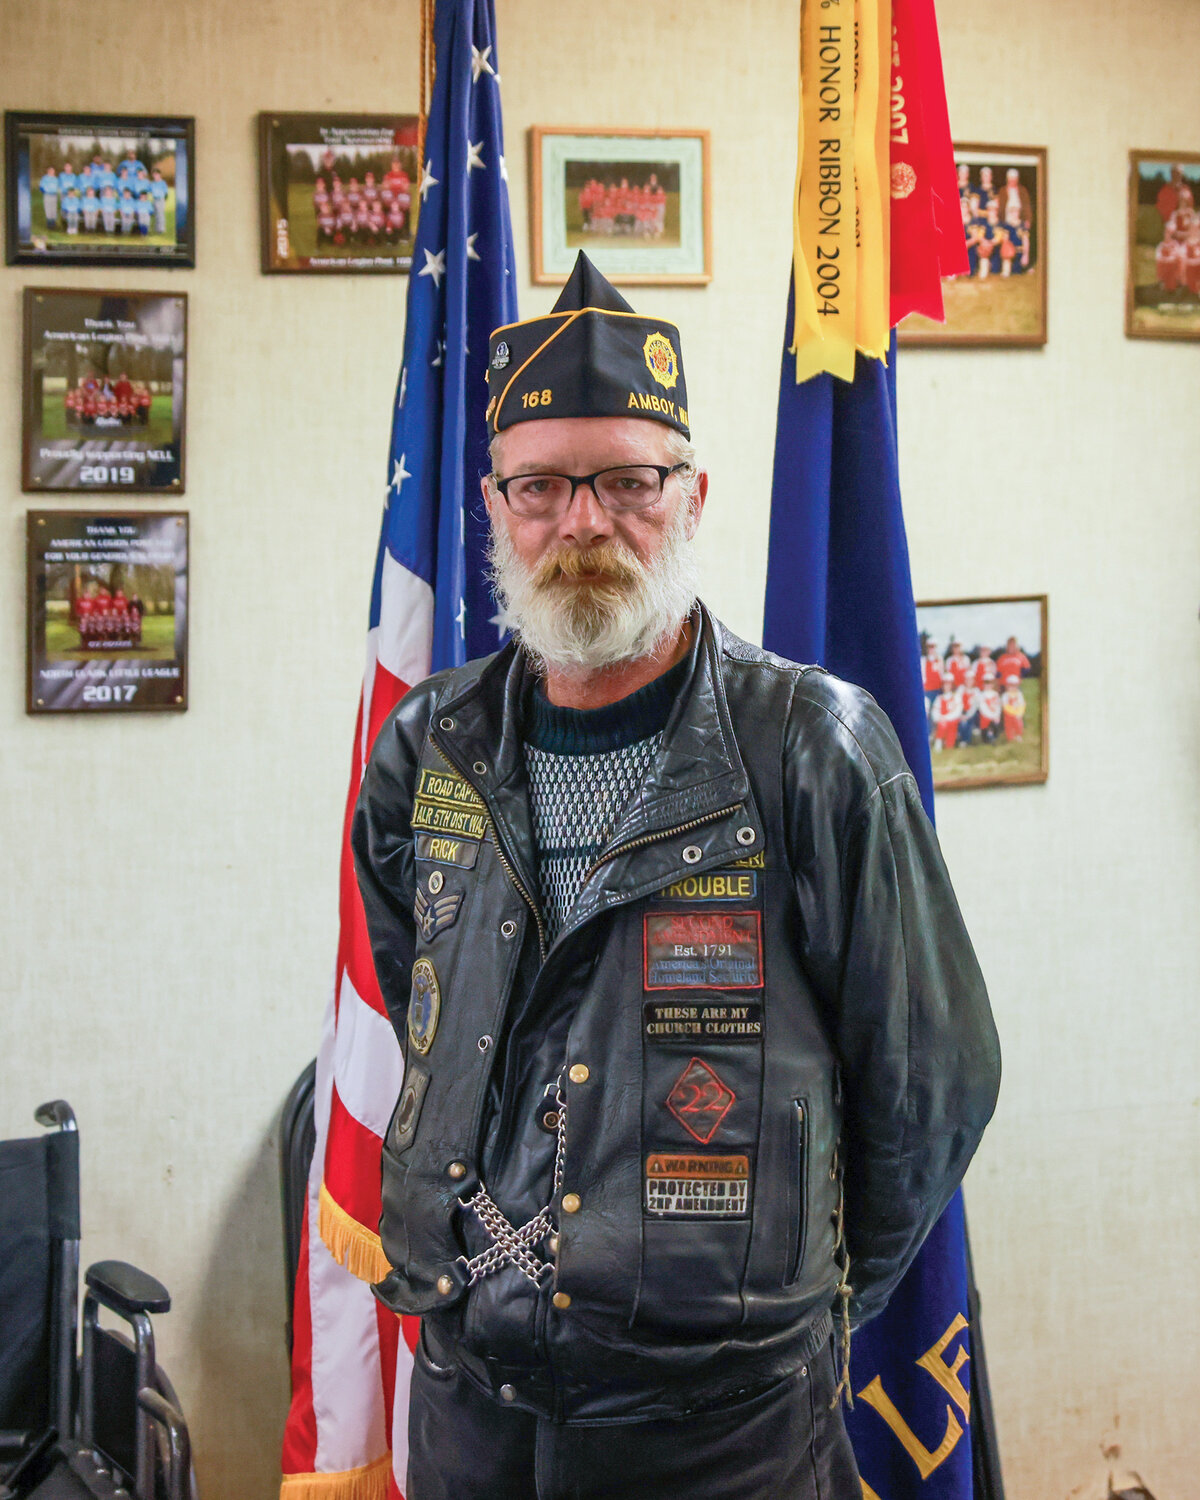 Since retiring from the military, Amboy American Legion Adjutant Rick Halle now serves his peers and community at the American Legion’s Tum Tum post in Amboy.